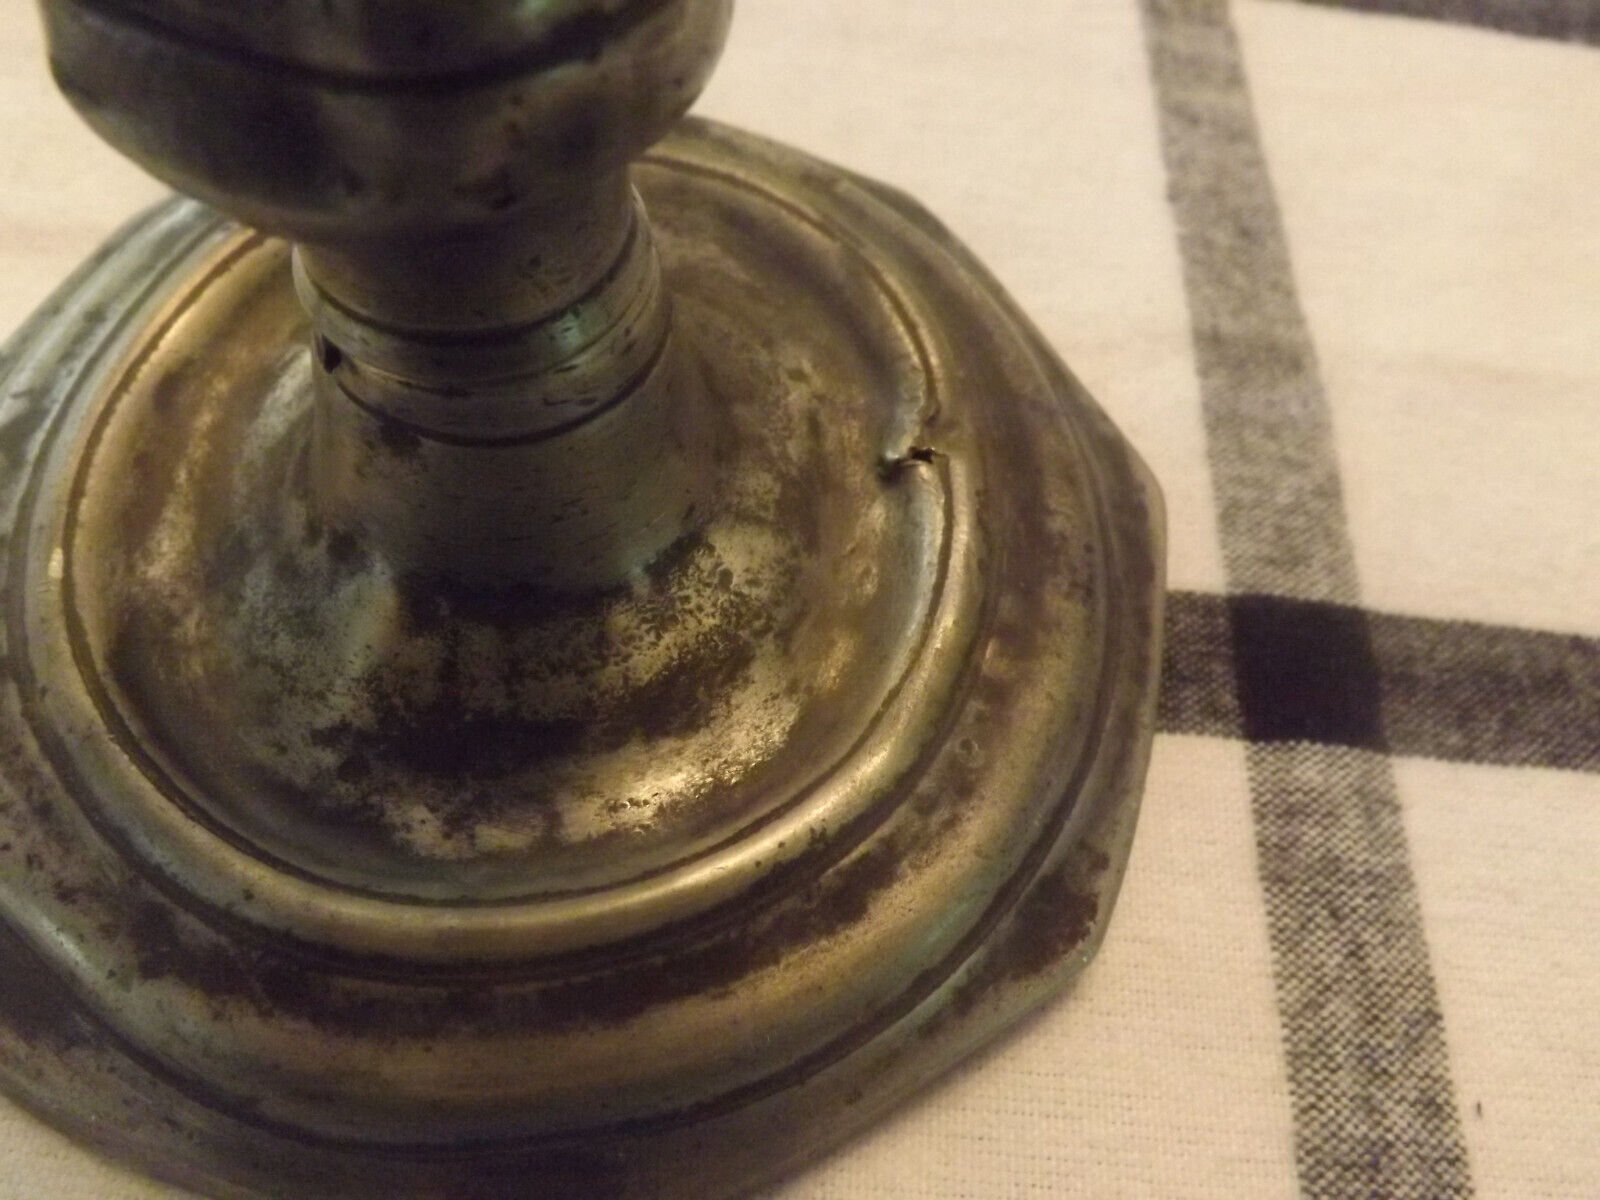 Primative pewter candle holder 1690's